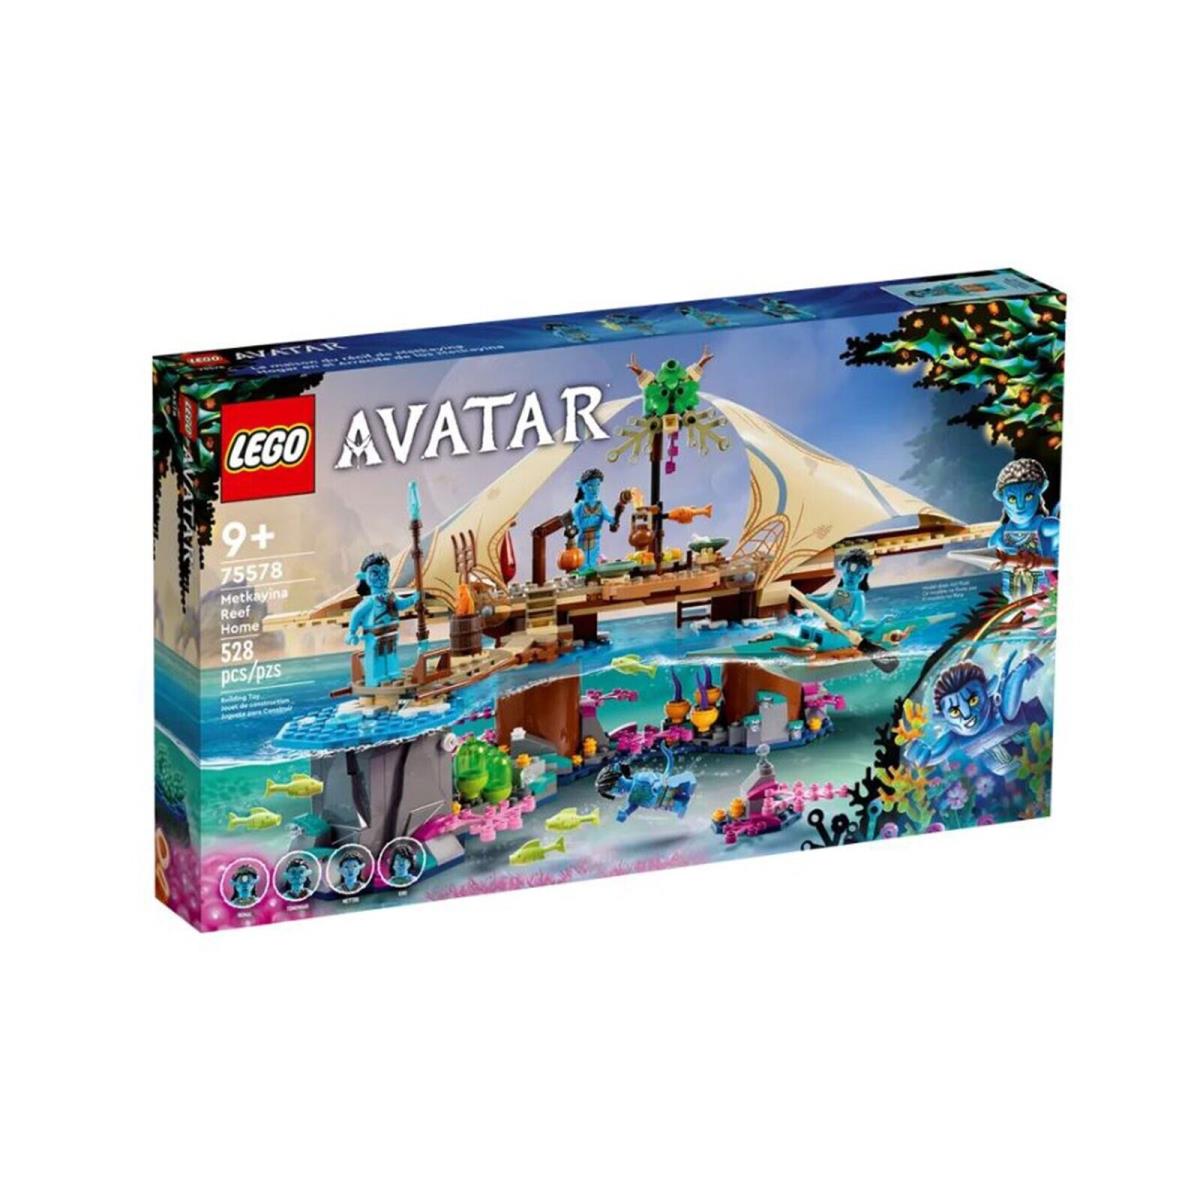 Lego Avatar Metkayina Reef Home Building Set 75578 IN Stock